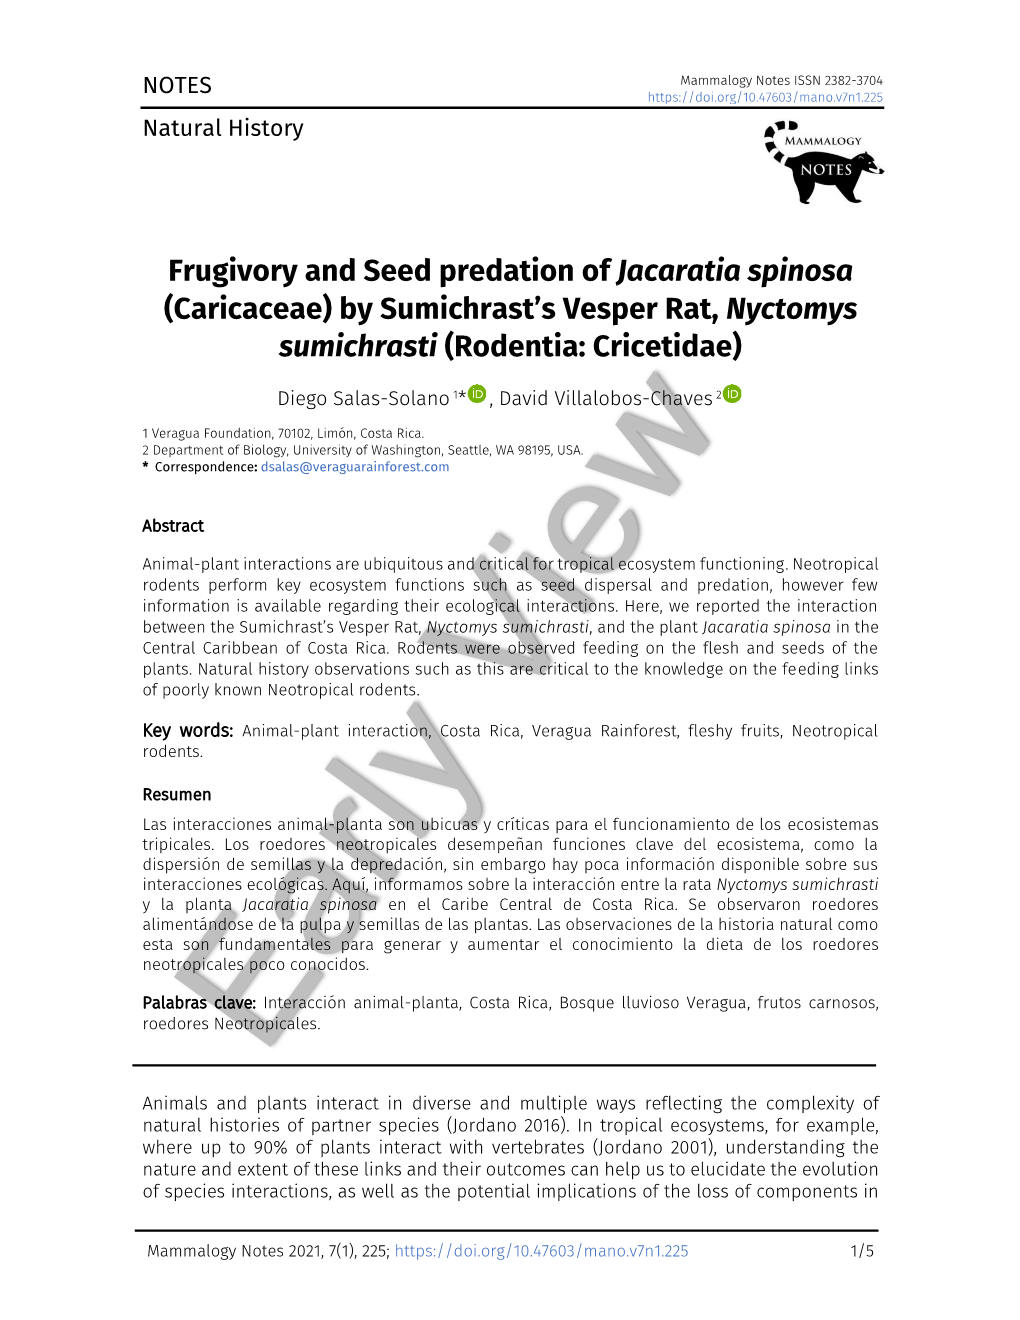 Frugivory and Seed Predation of Jacaratia Spinosa (Caricaceae) by Sumichrast’S Vesper Rat, Nyctomys Sumichrasti (Rodentia: Cricetidae)